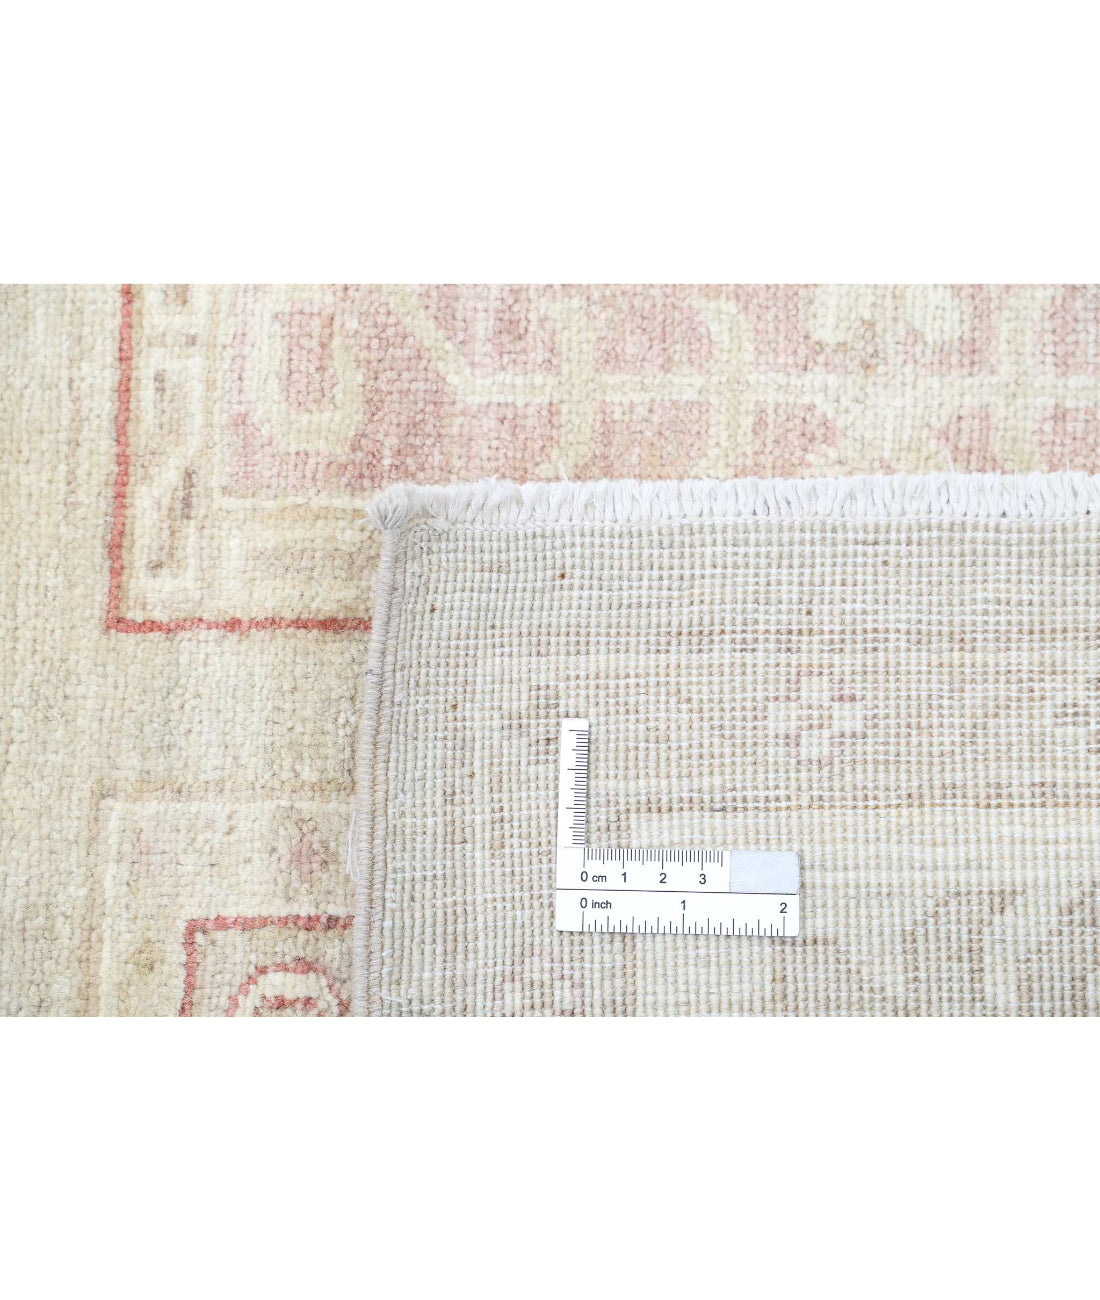 Hand Knotted Bakhtiari Wool Rug - 6'4'' x 9'3'' 6'4'' x 9'3'' (190 X 278) / Taupe / Ivory